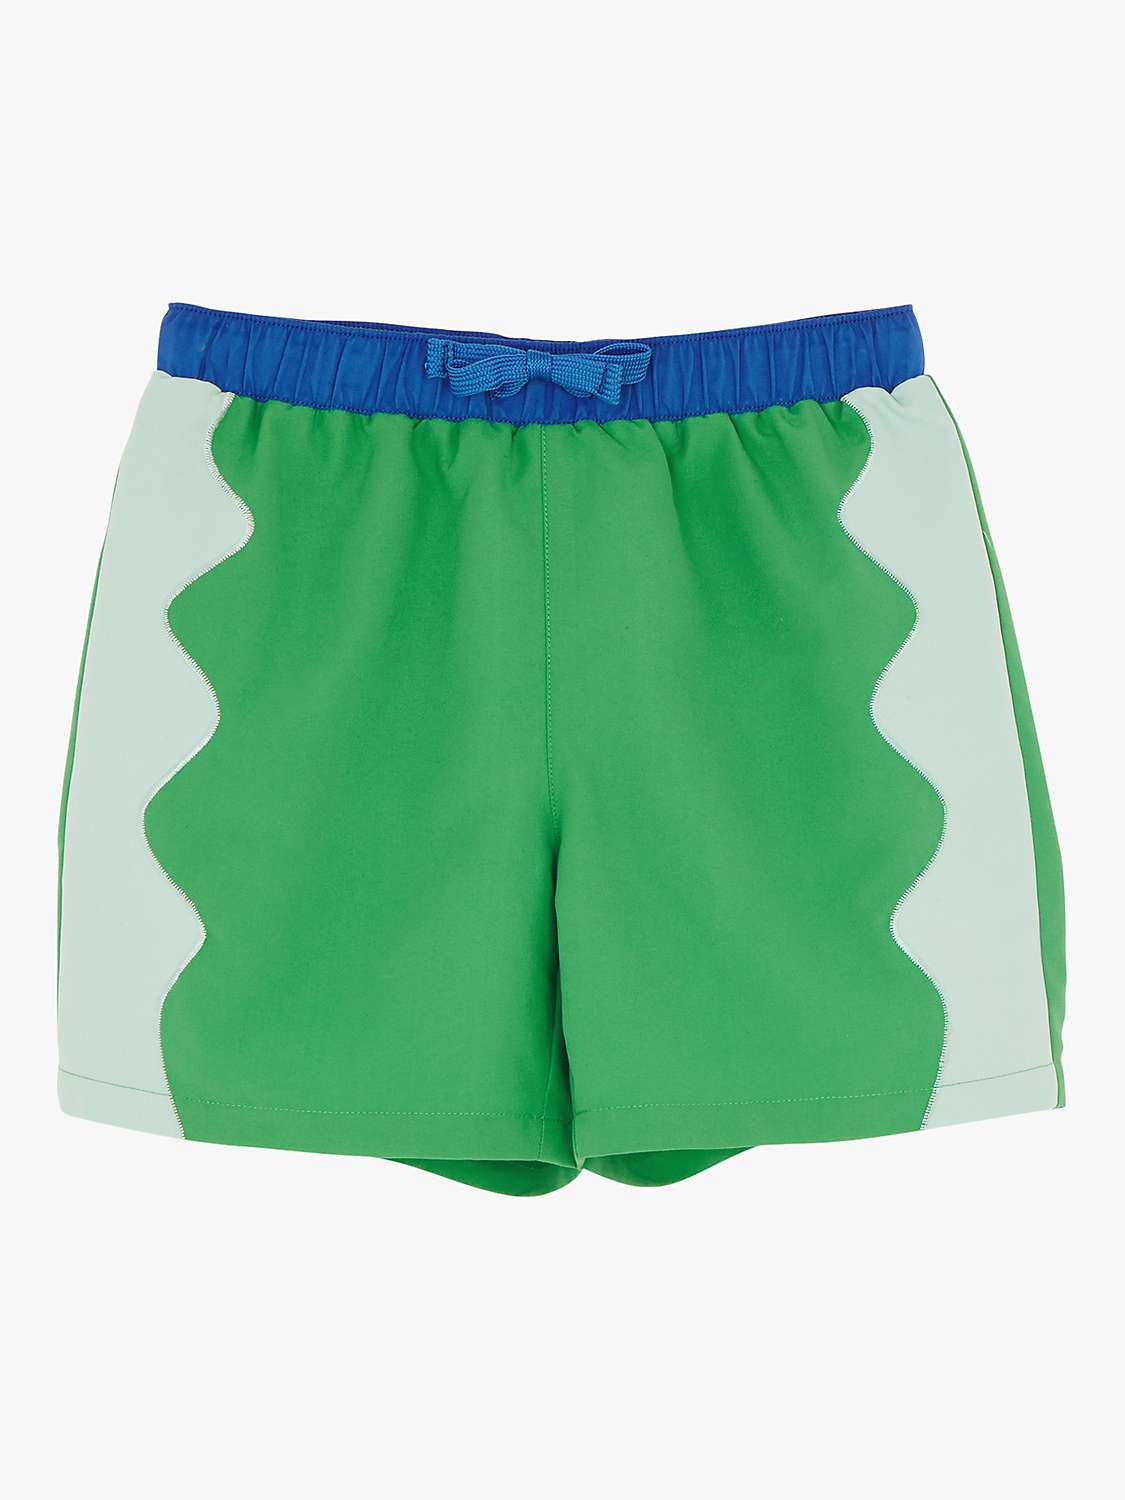 Buy Angels by Accessorize Kids' Wave Swim Shorts, Green/Multi Online at johnlewis.com